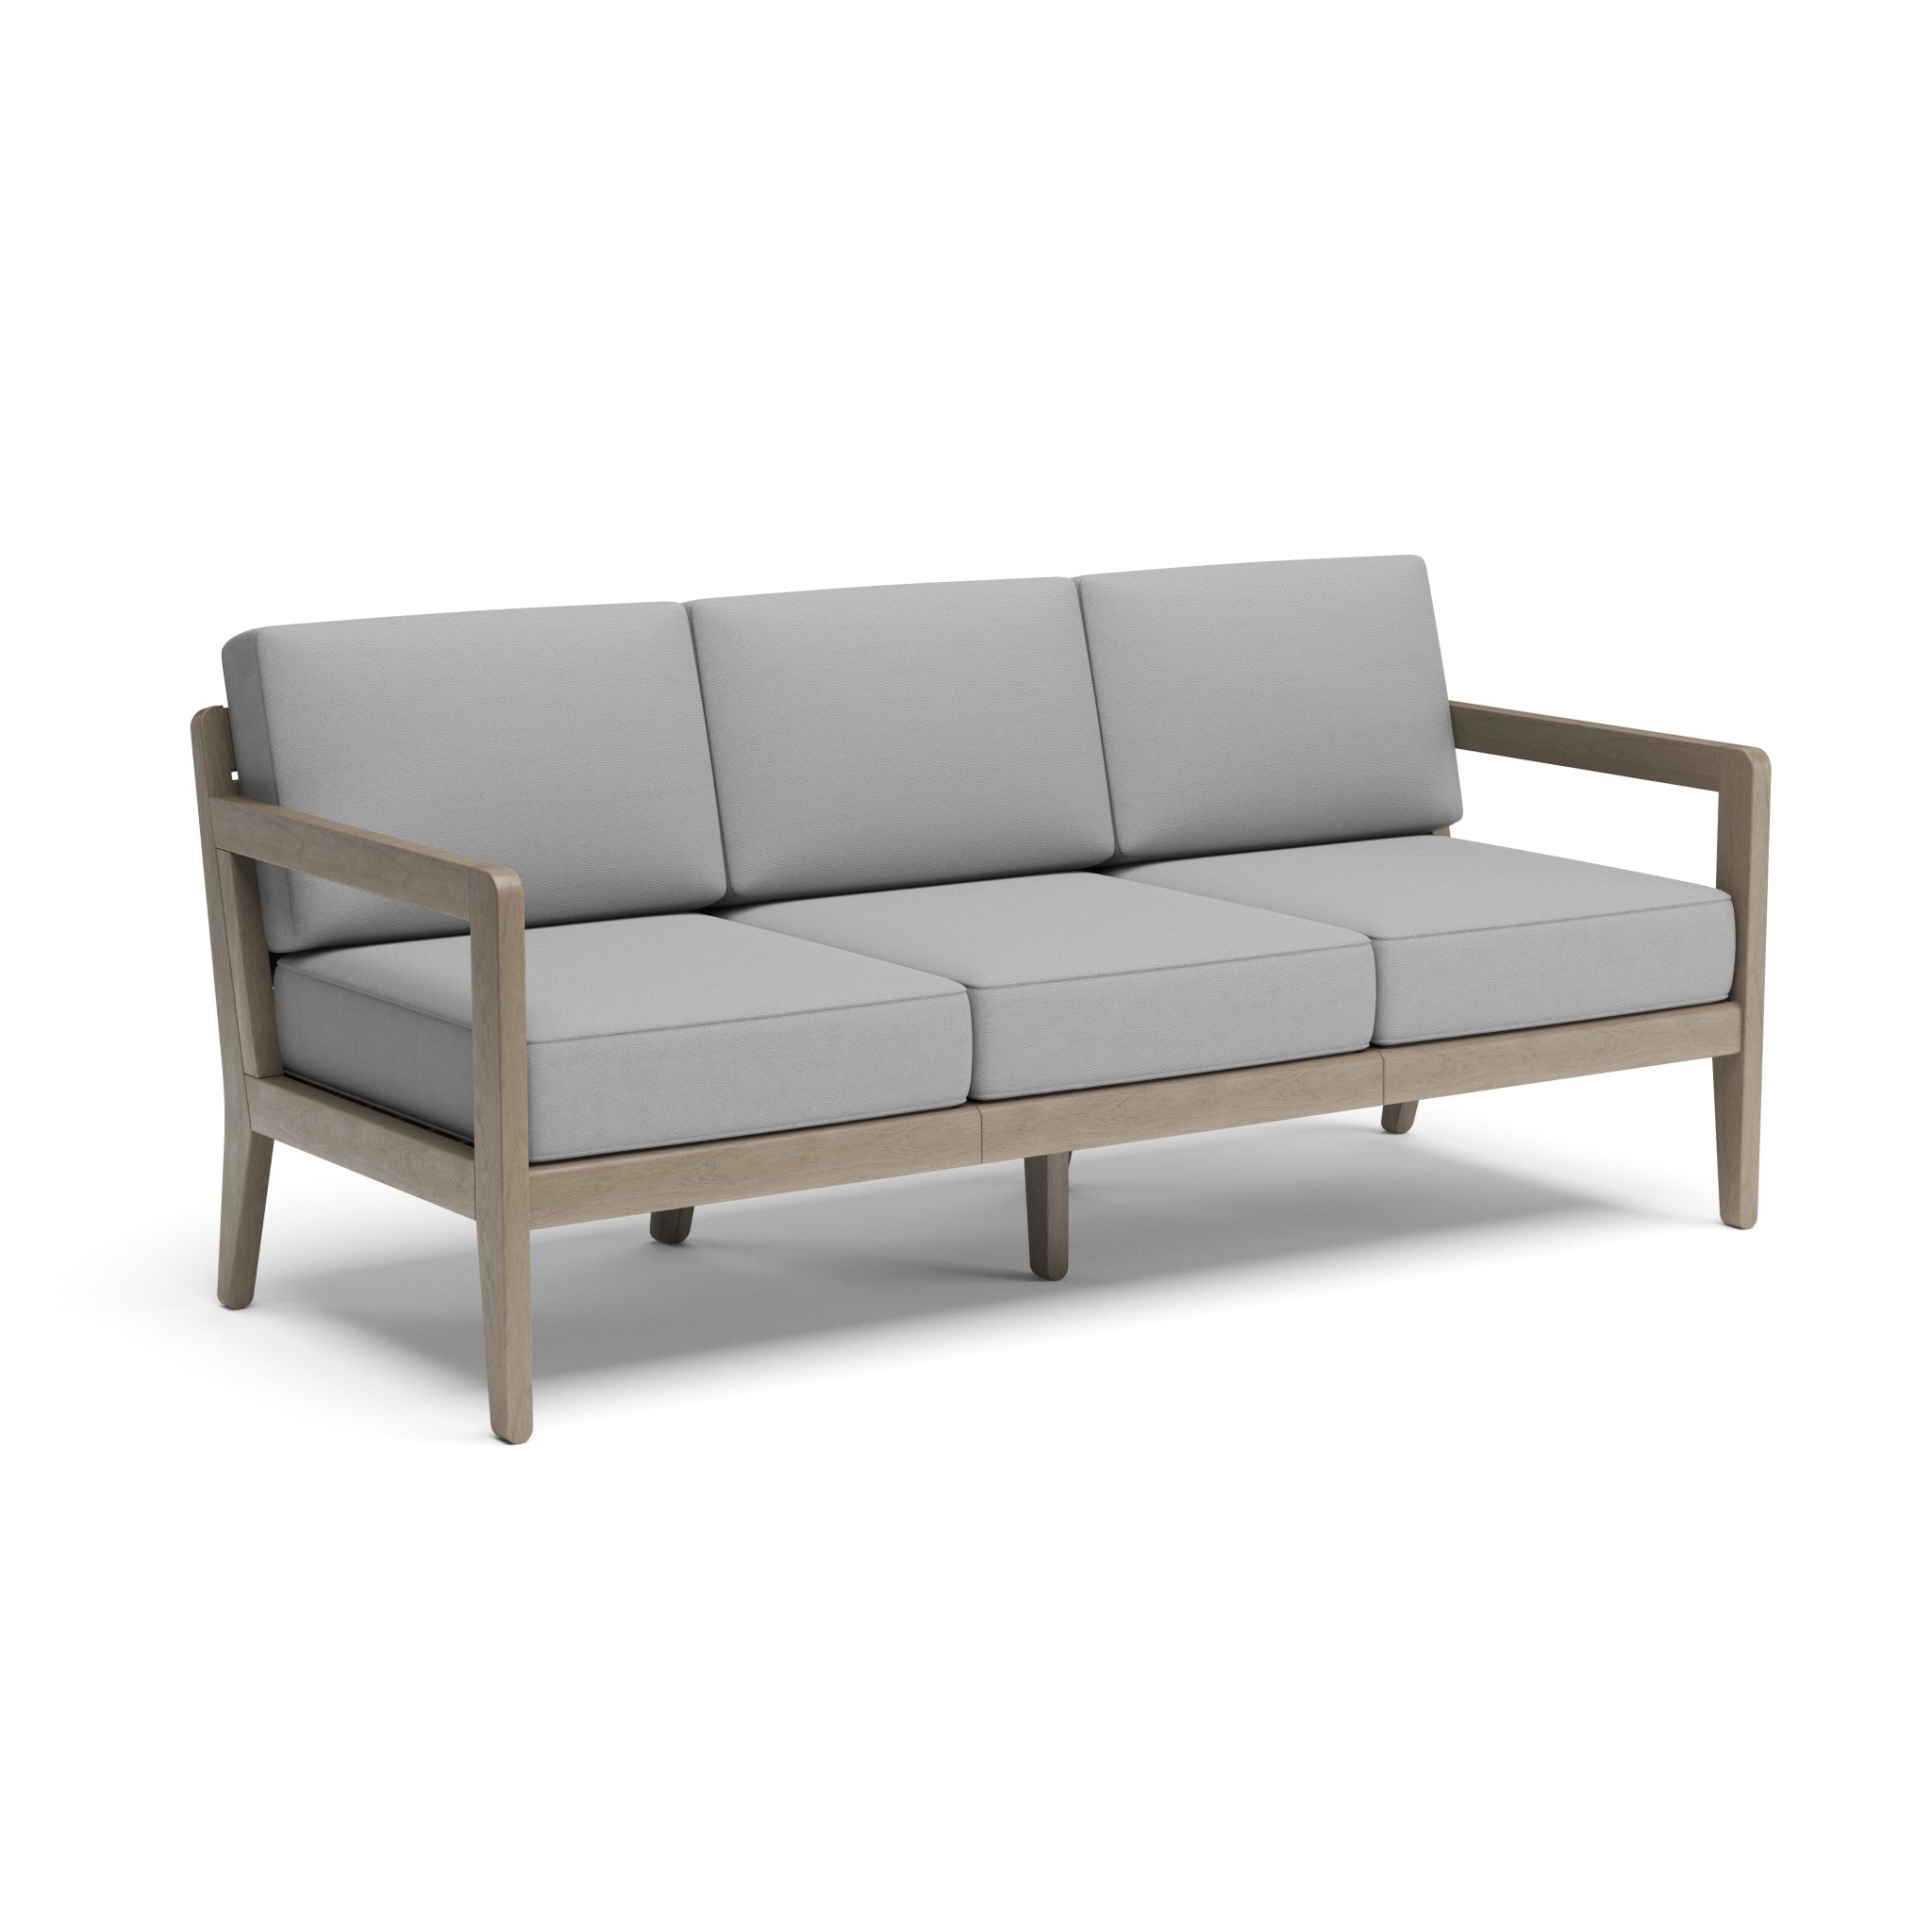 Sustain Outdoor Sofa 4-Piece Set by Homestyles - Gray - Wood - 5675-3010D21